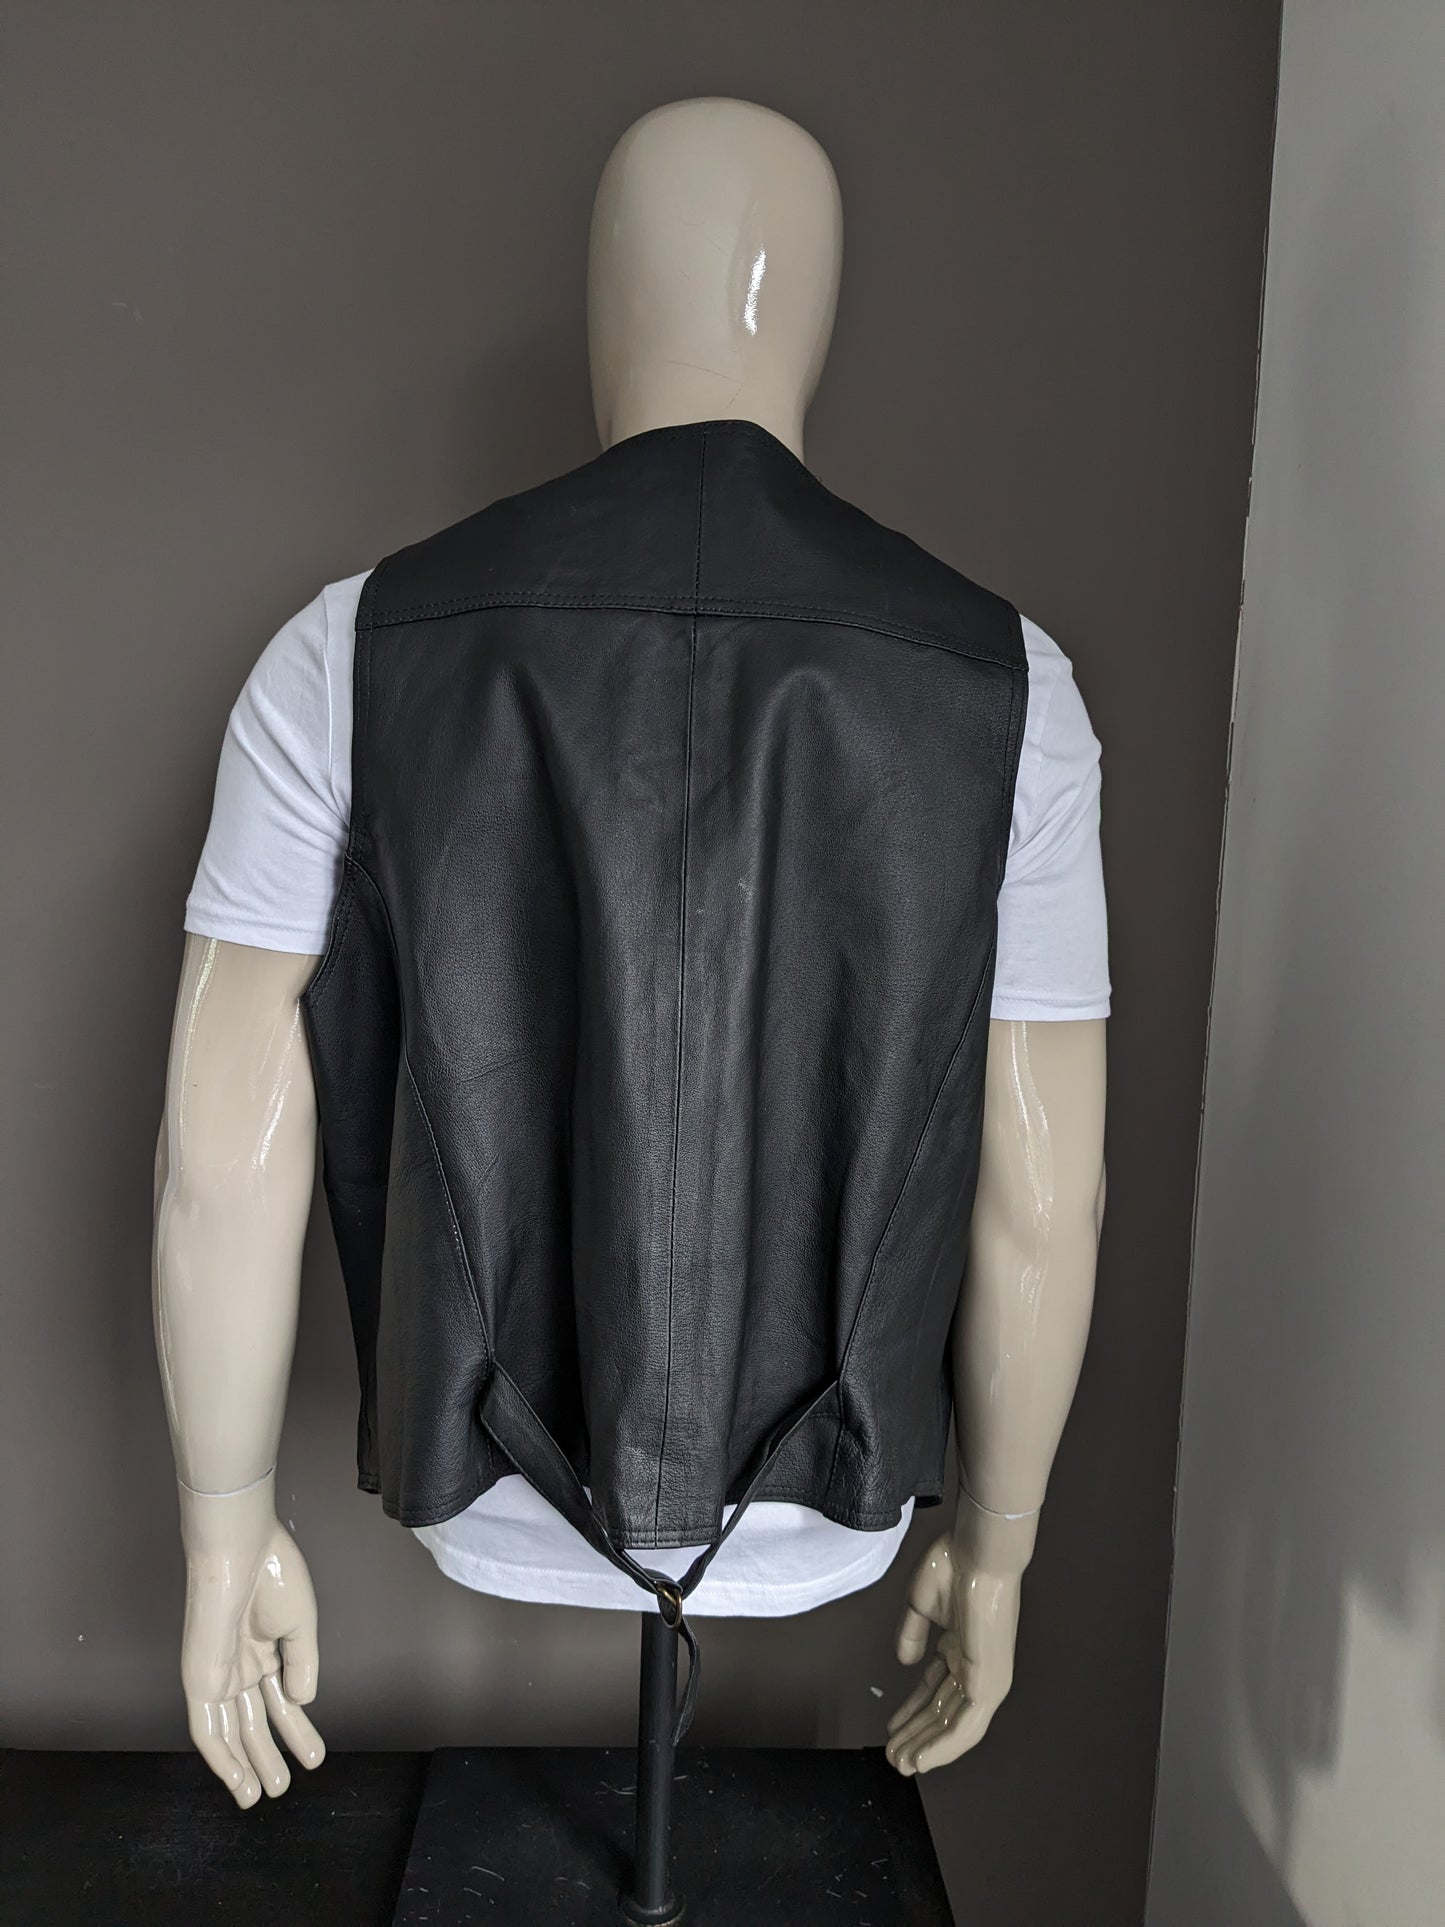 Double -sided John F. Gee Pigs Leather waistcoat with 2 inner pockets. Size XXXL / 3XL